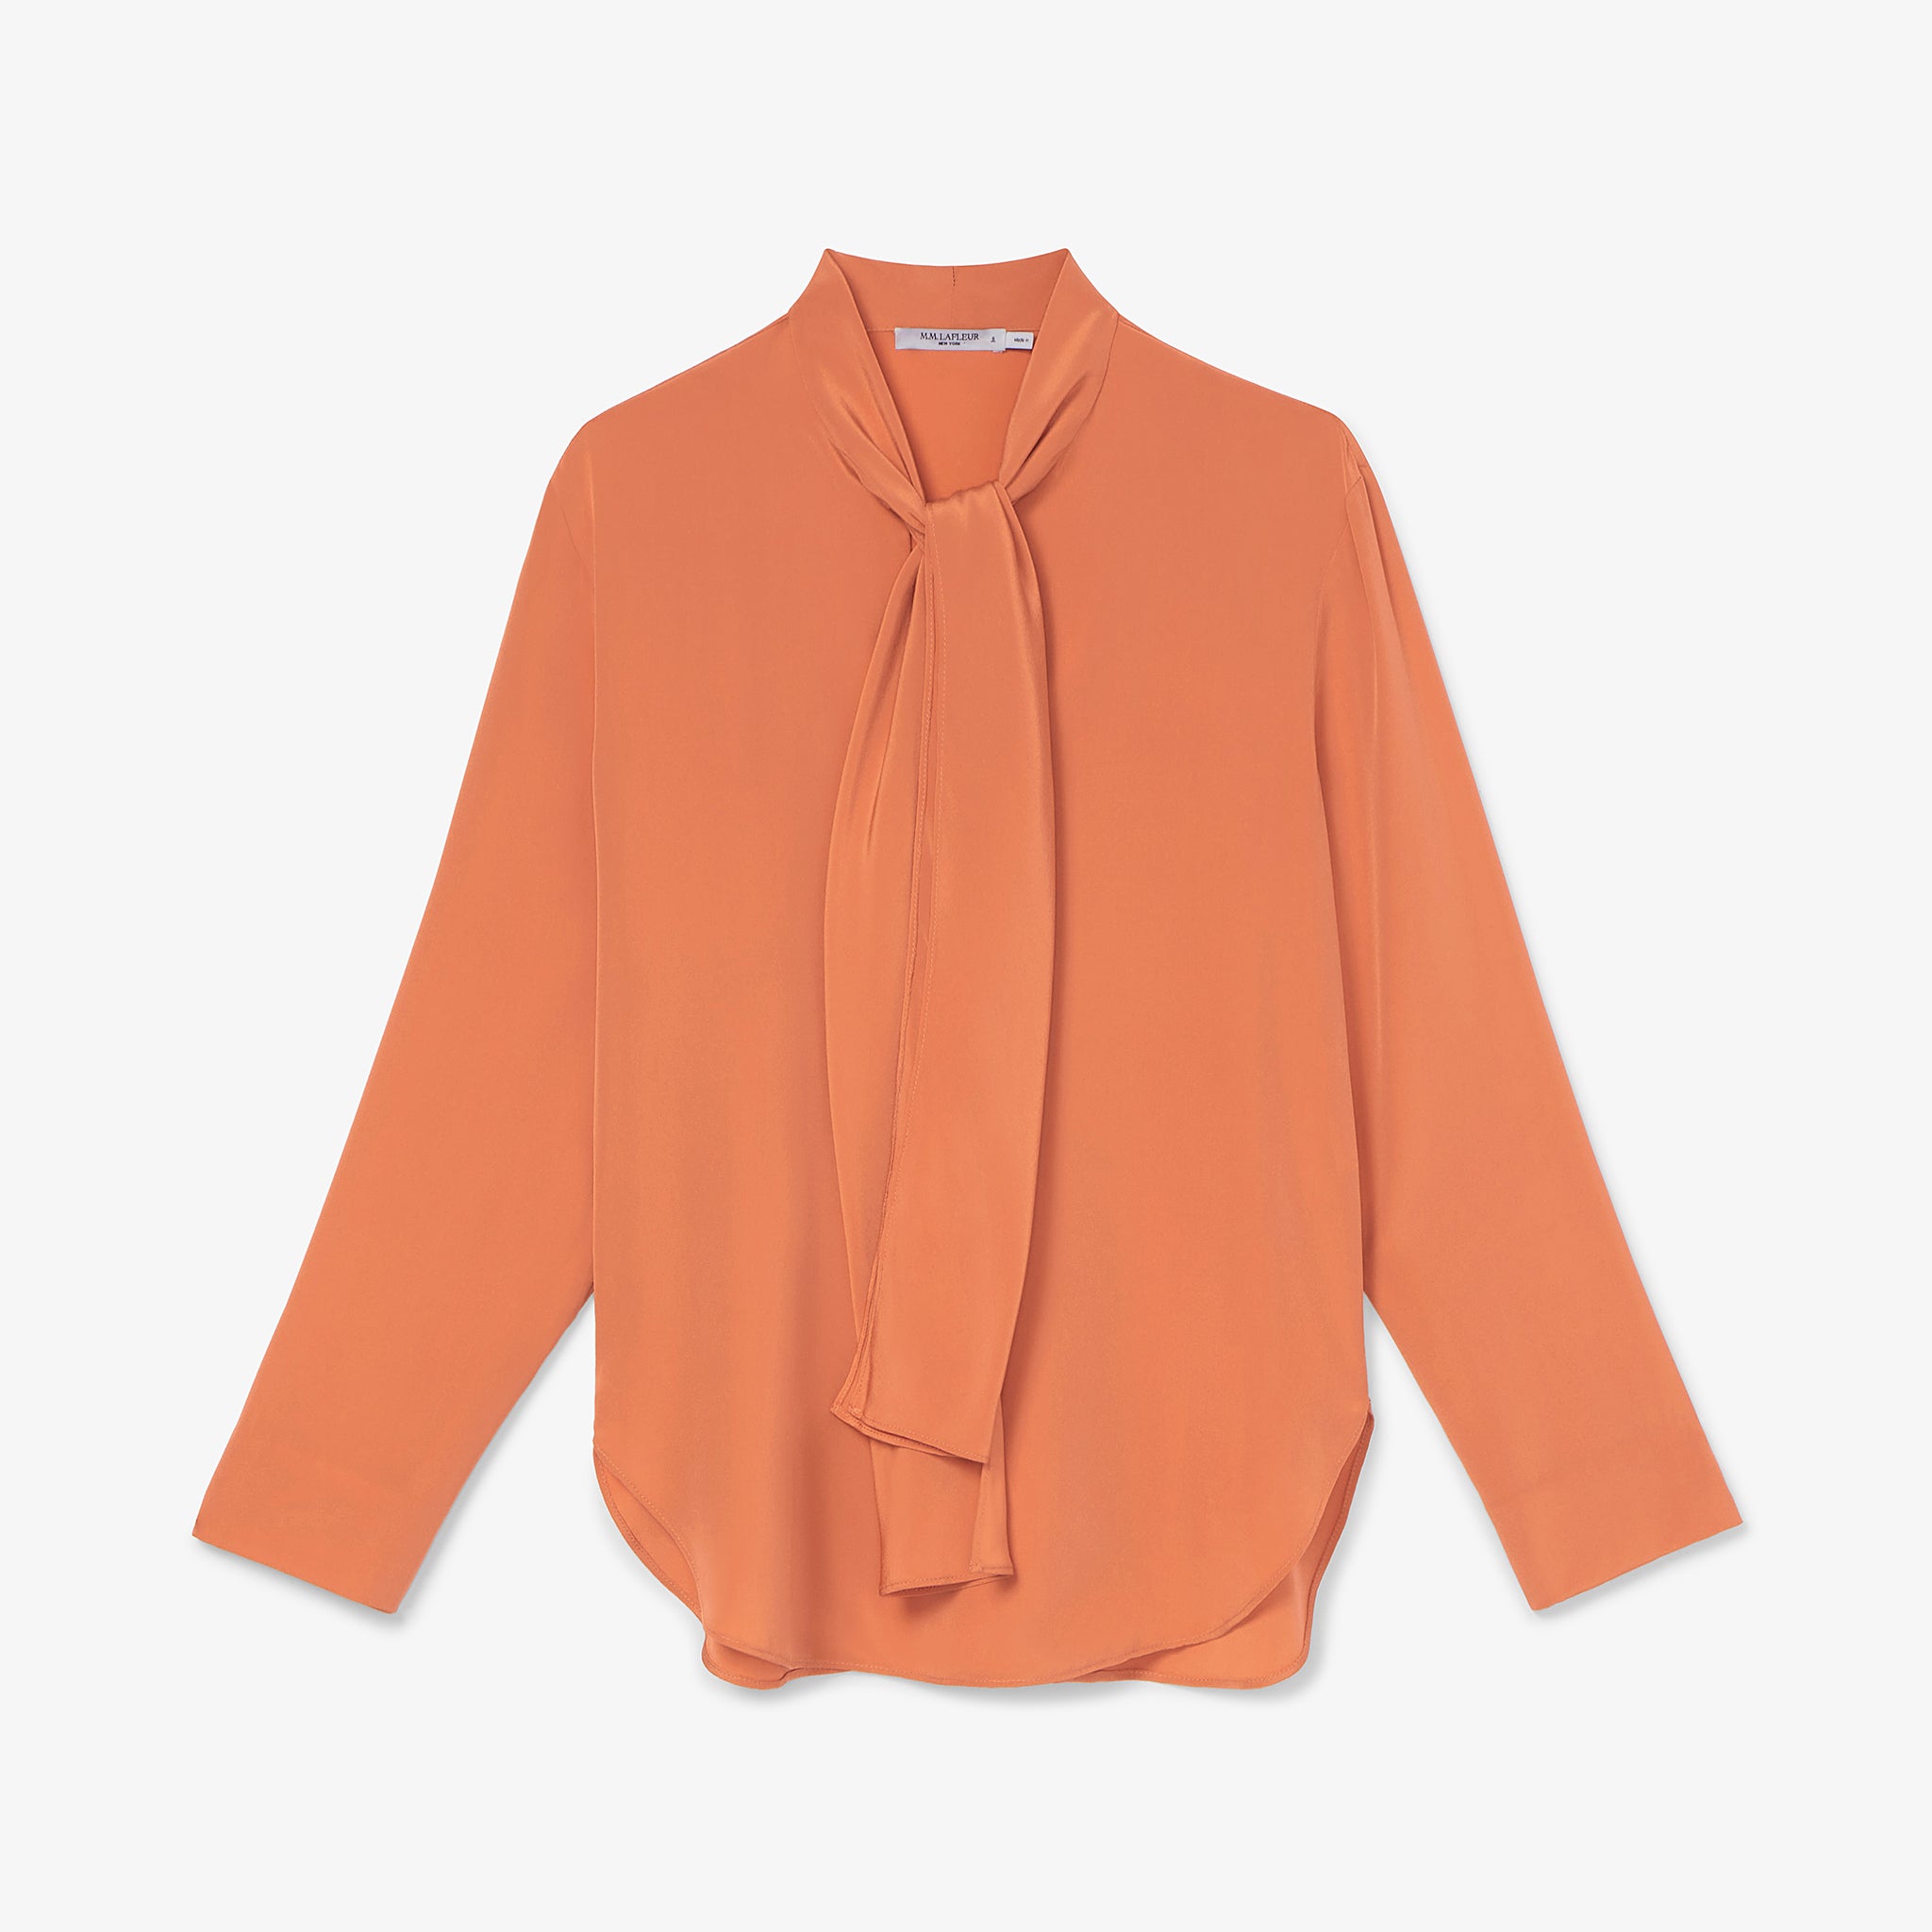 Packshot image of the Darcy Top in Guava